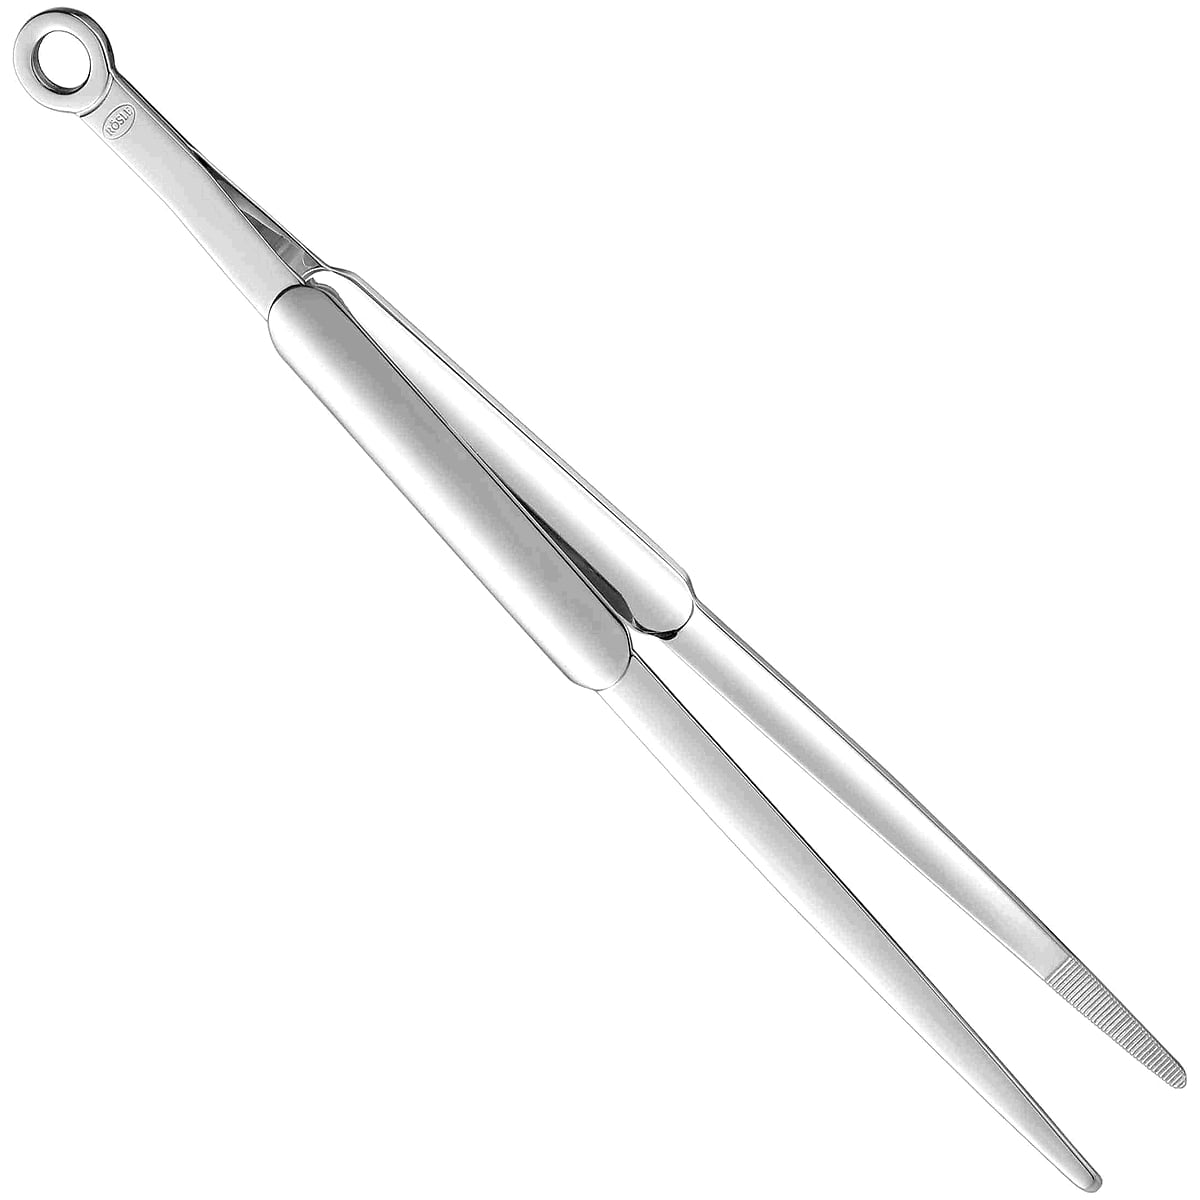 Walfos 12 inch Silicone Stainless Steel Tongs - MICROVISOR